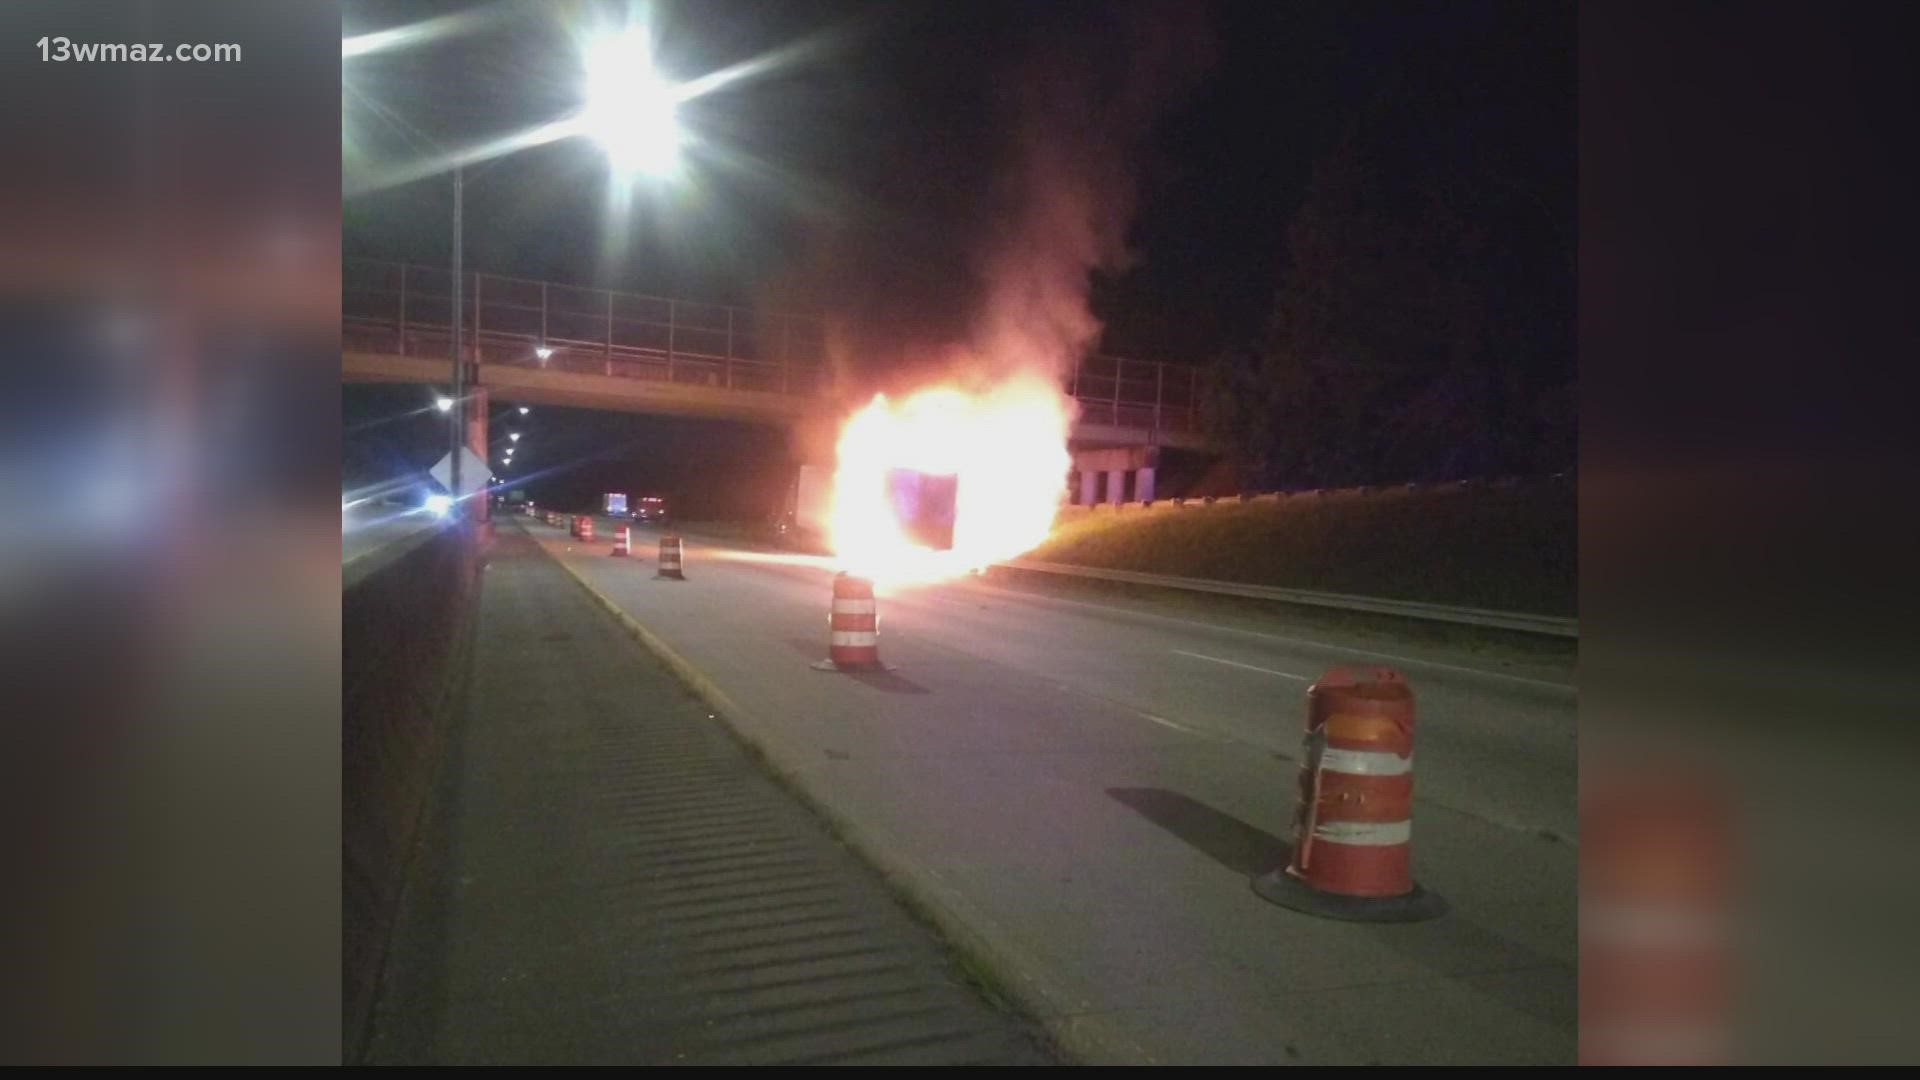 Reports came in around 2:45 a.m. for a truck on fire along I-75 south.